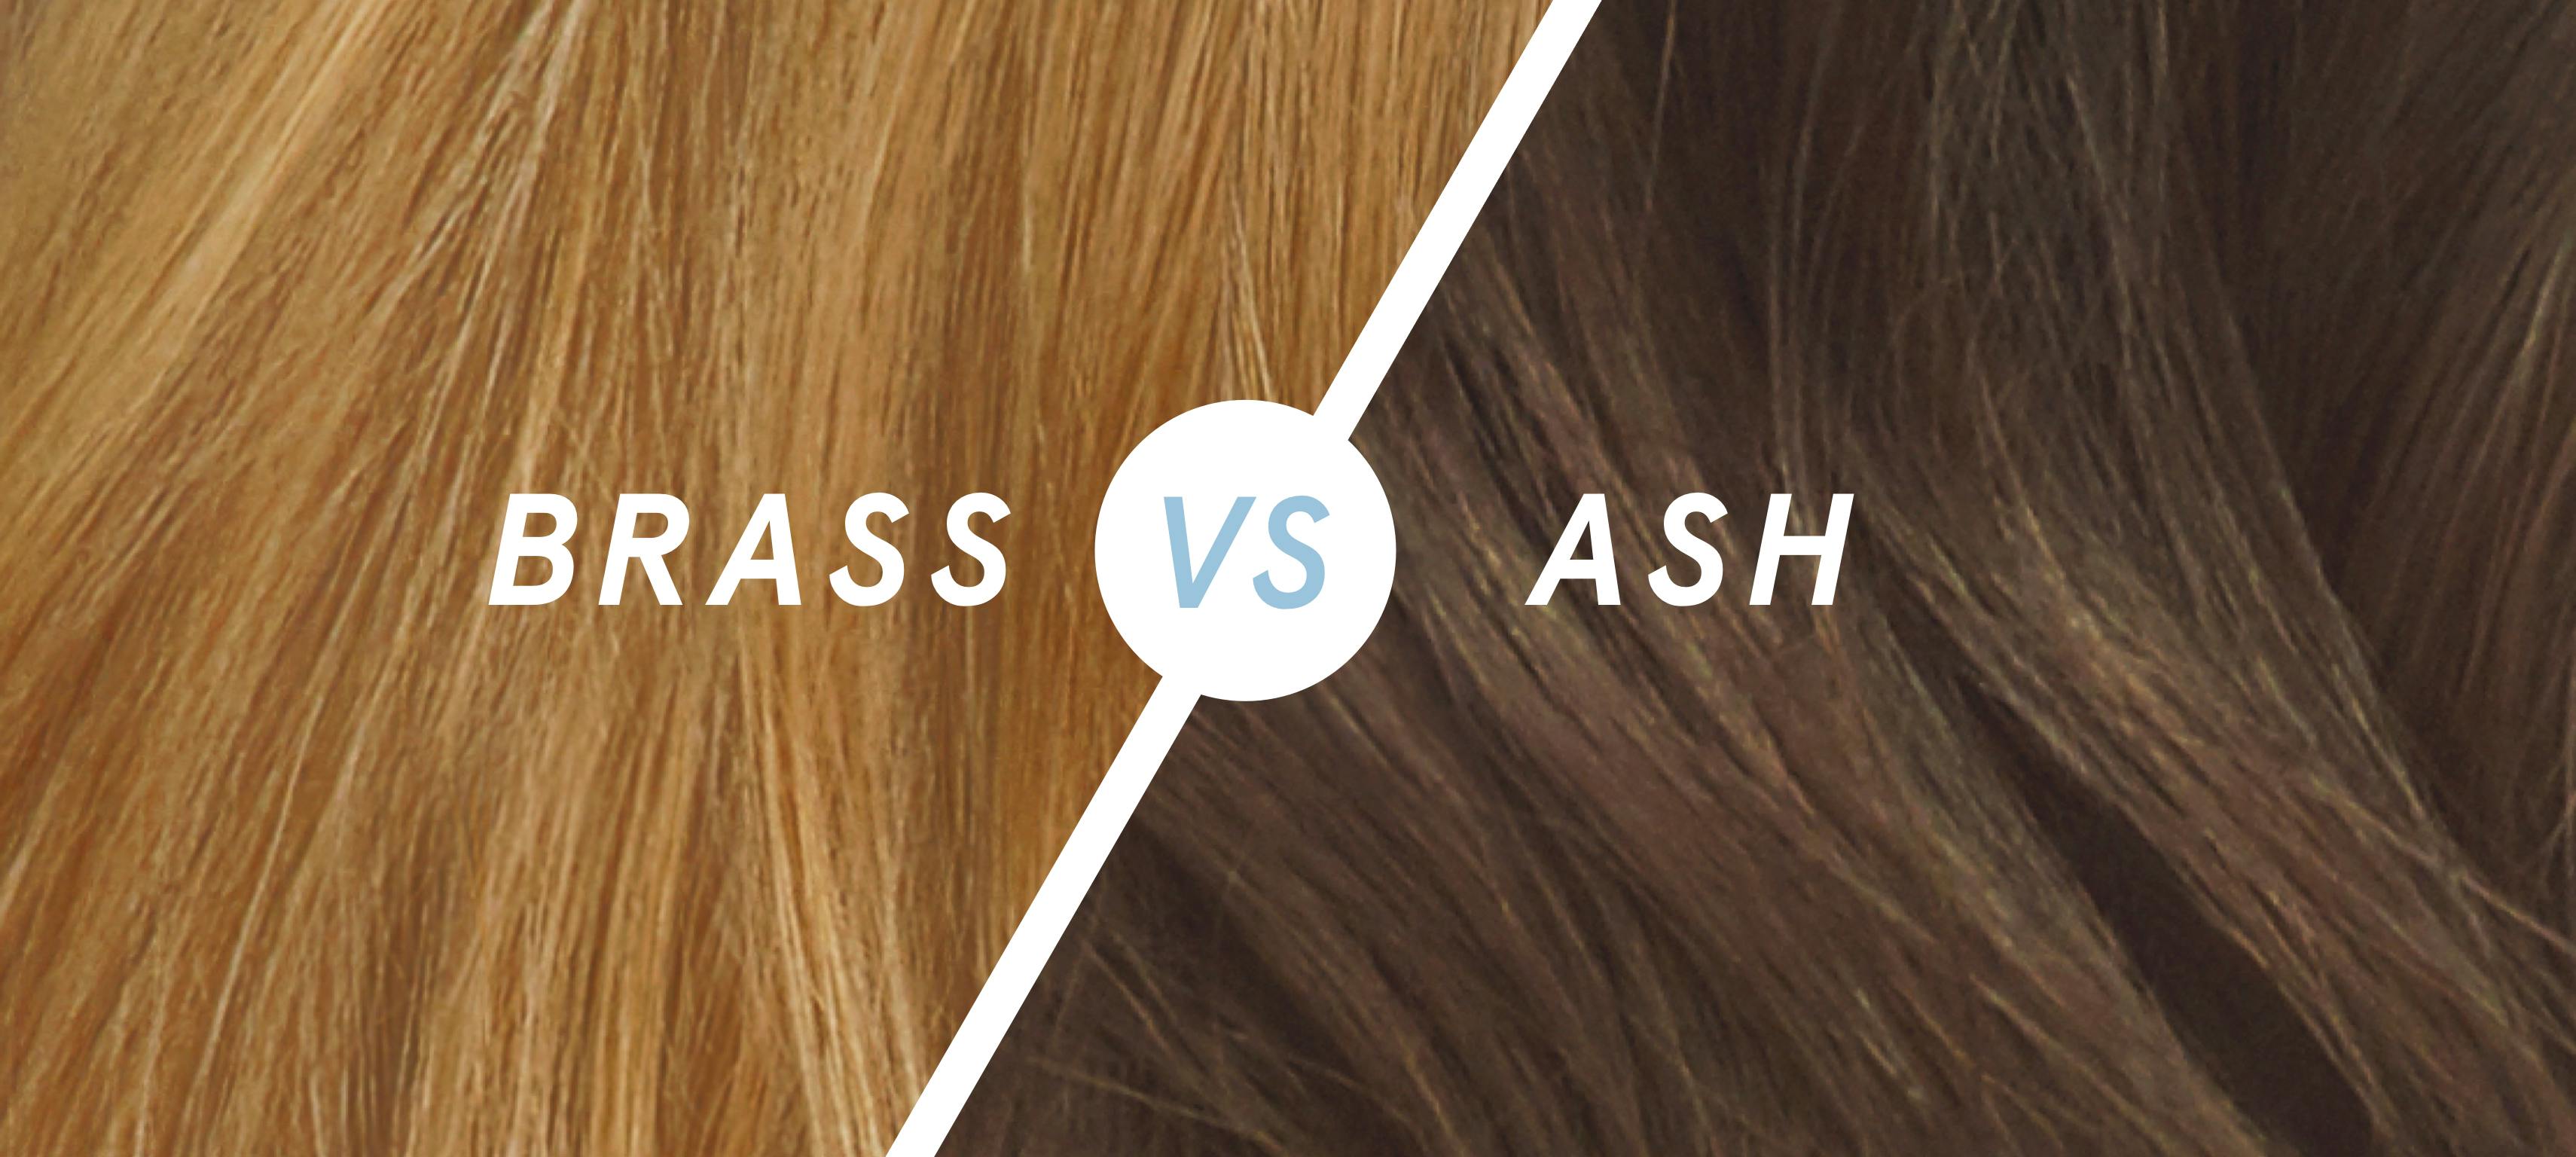 What Does Brassy Hair Look Like - The Skincare Edit